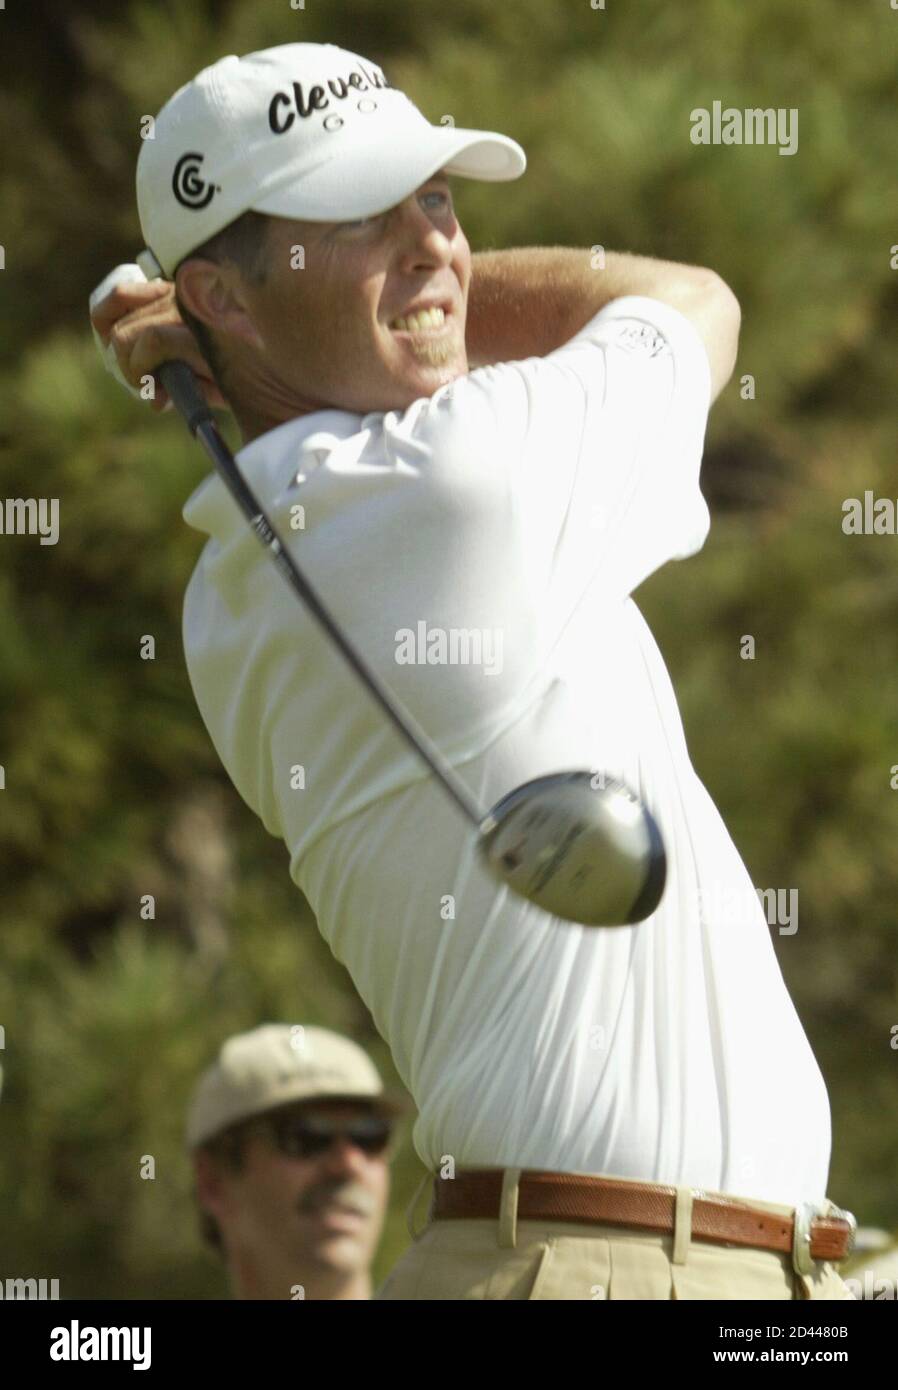 Jonathon Kaye watches his tee shot on the 10th hole during the first round of The International, at Castle Pines golf club in Castle Rock, Colorado, August 7, 2003. Kaye is the early leader in the modified Stableford scoring tourney. REUTERS/Gary C. Caskey  GCC/GN Stock Photo